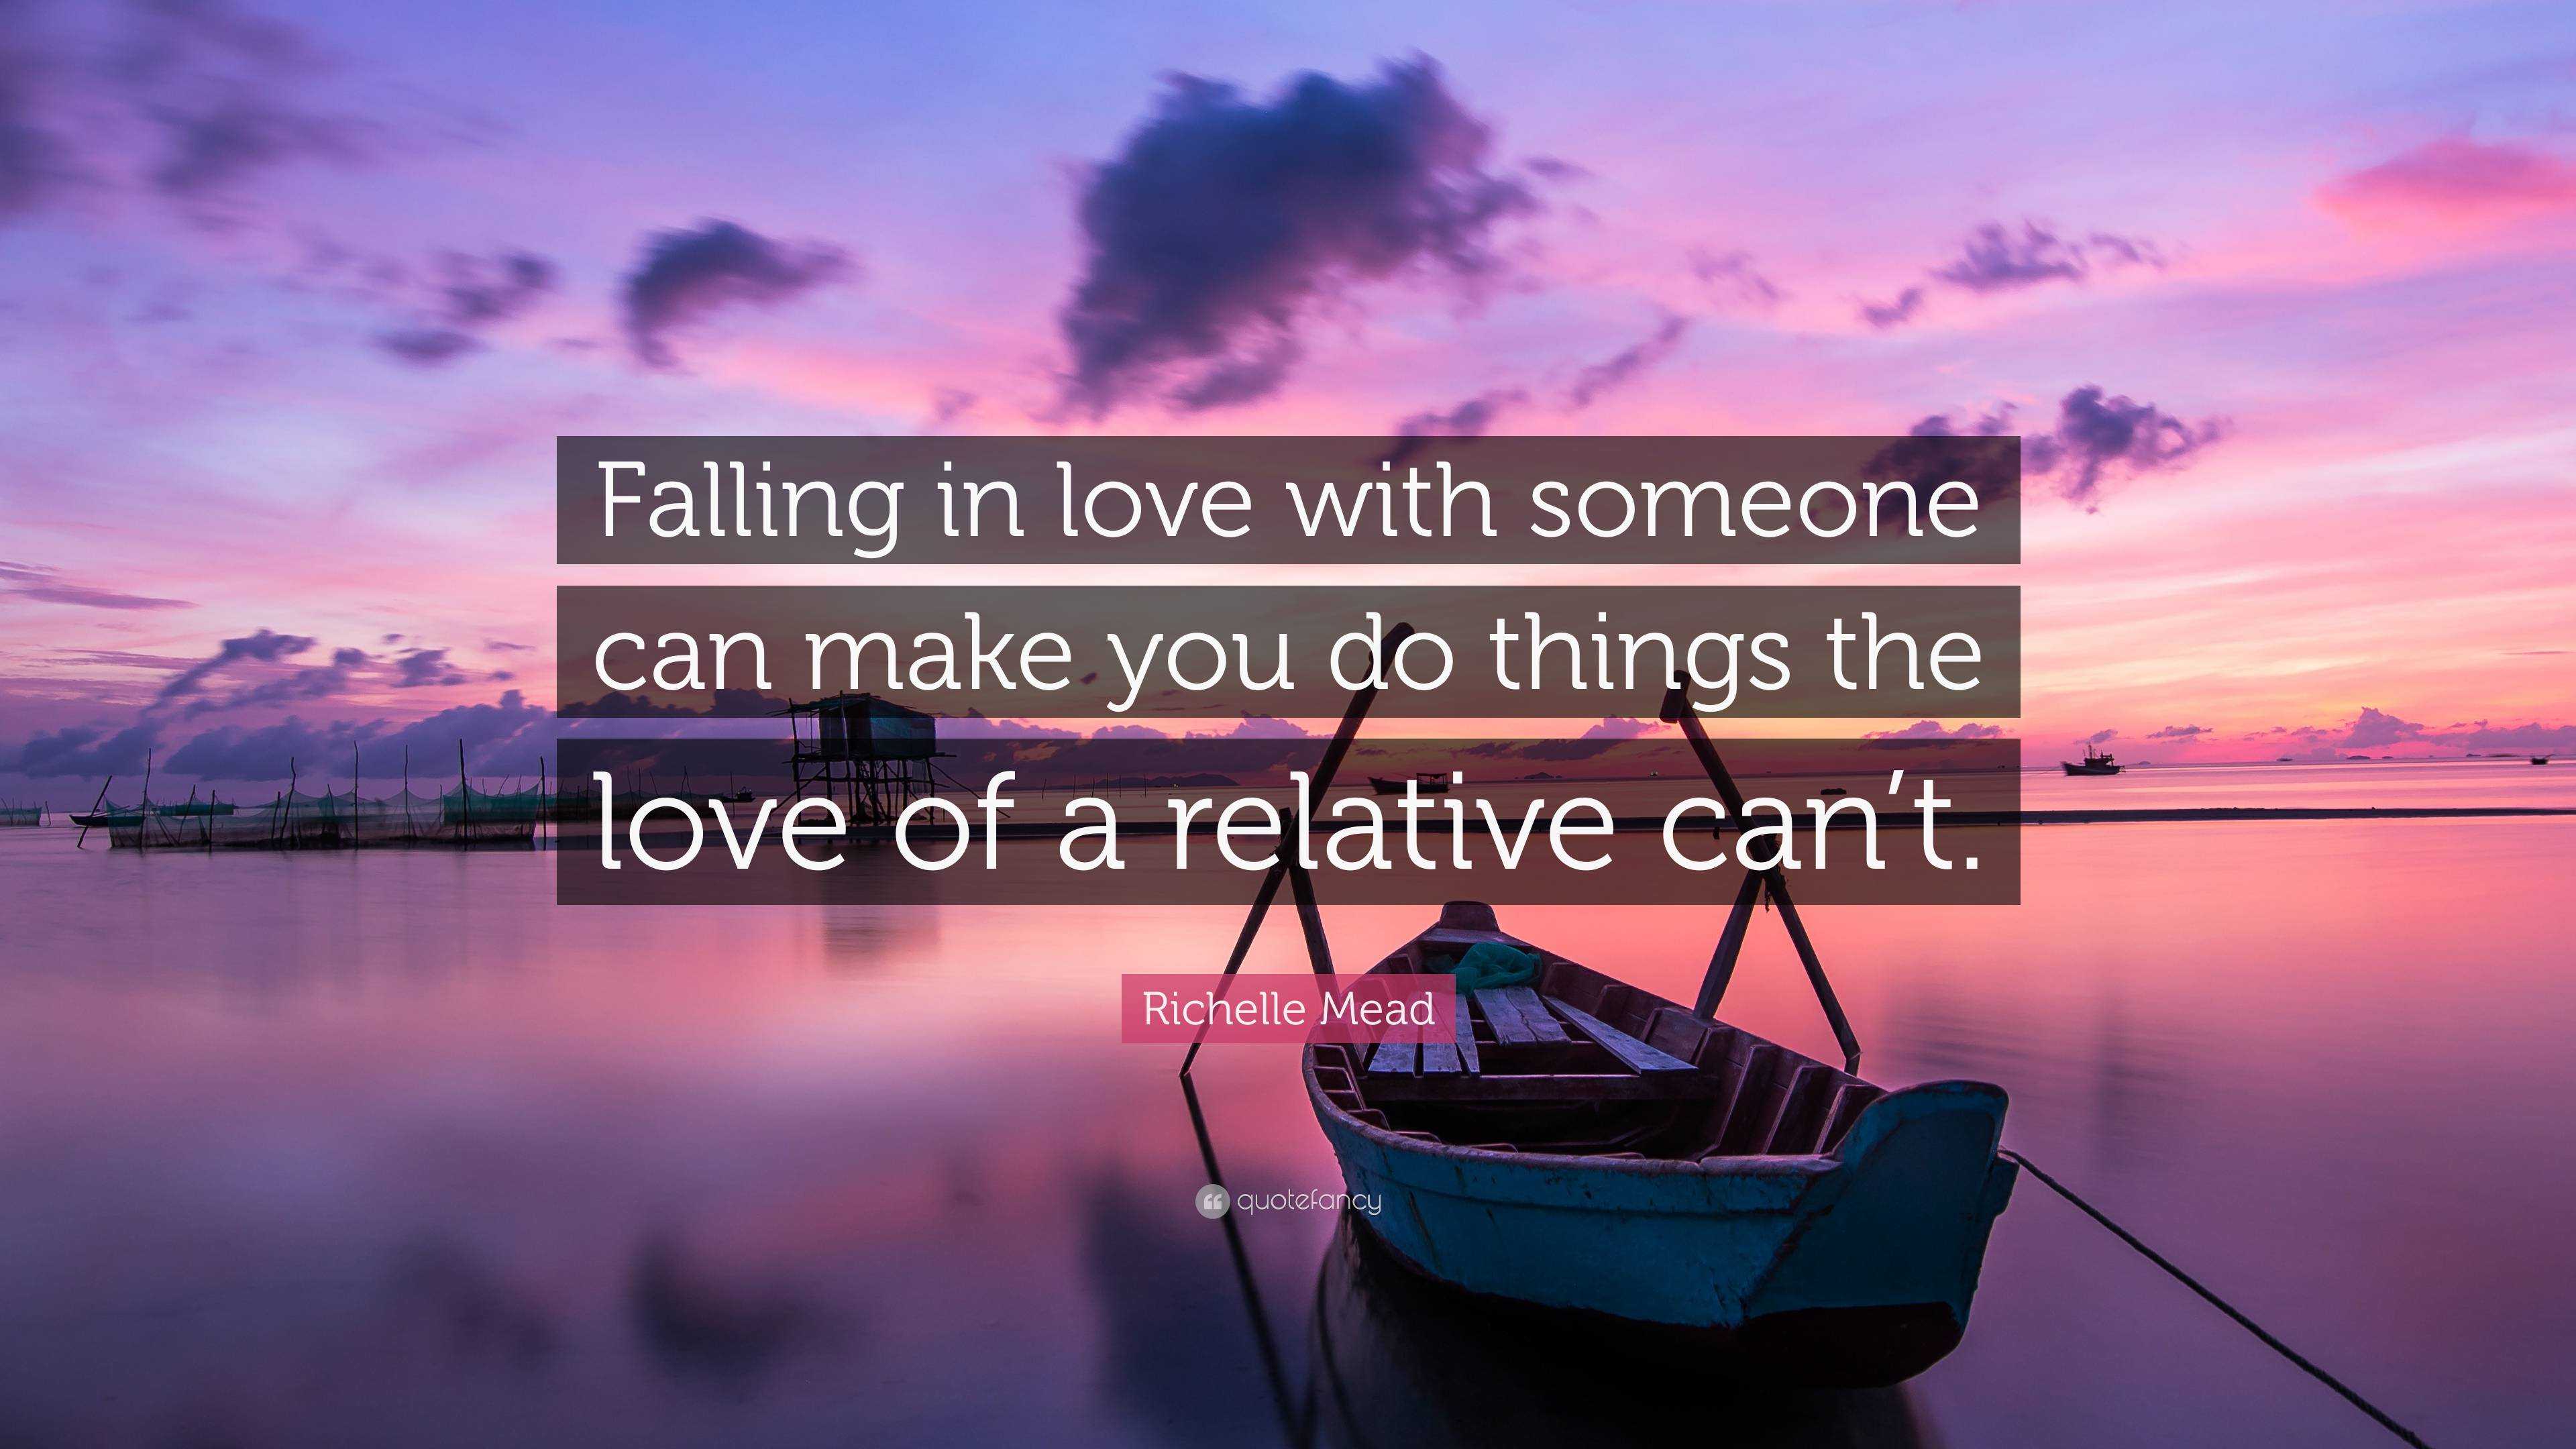 Richelle Mead Quote “falling In Love With Someone Can Make You Do Things The Love Of A Relative